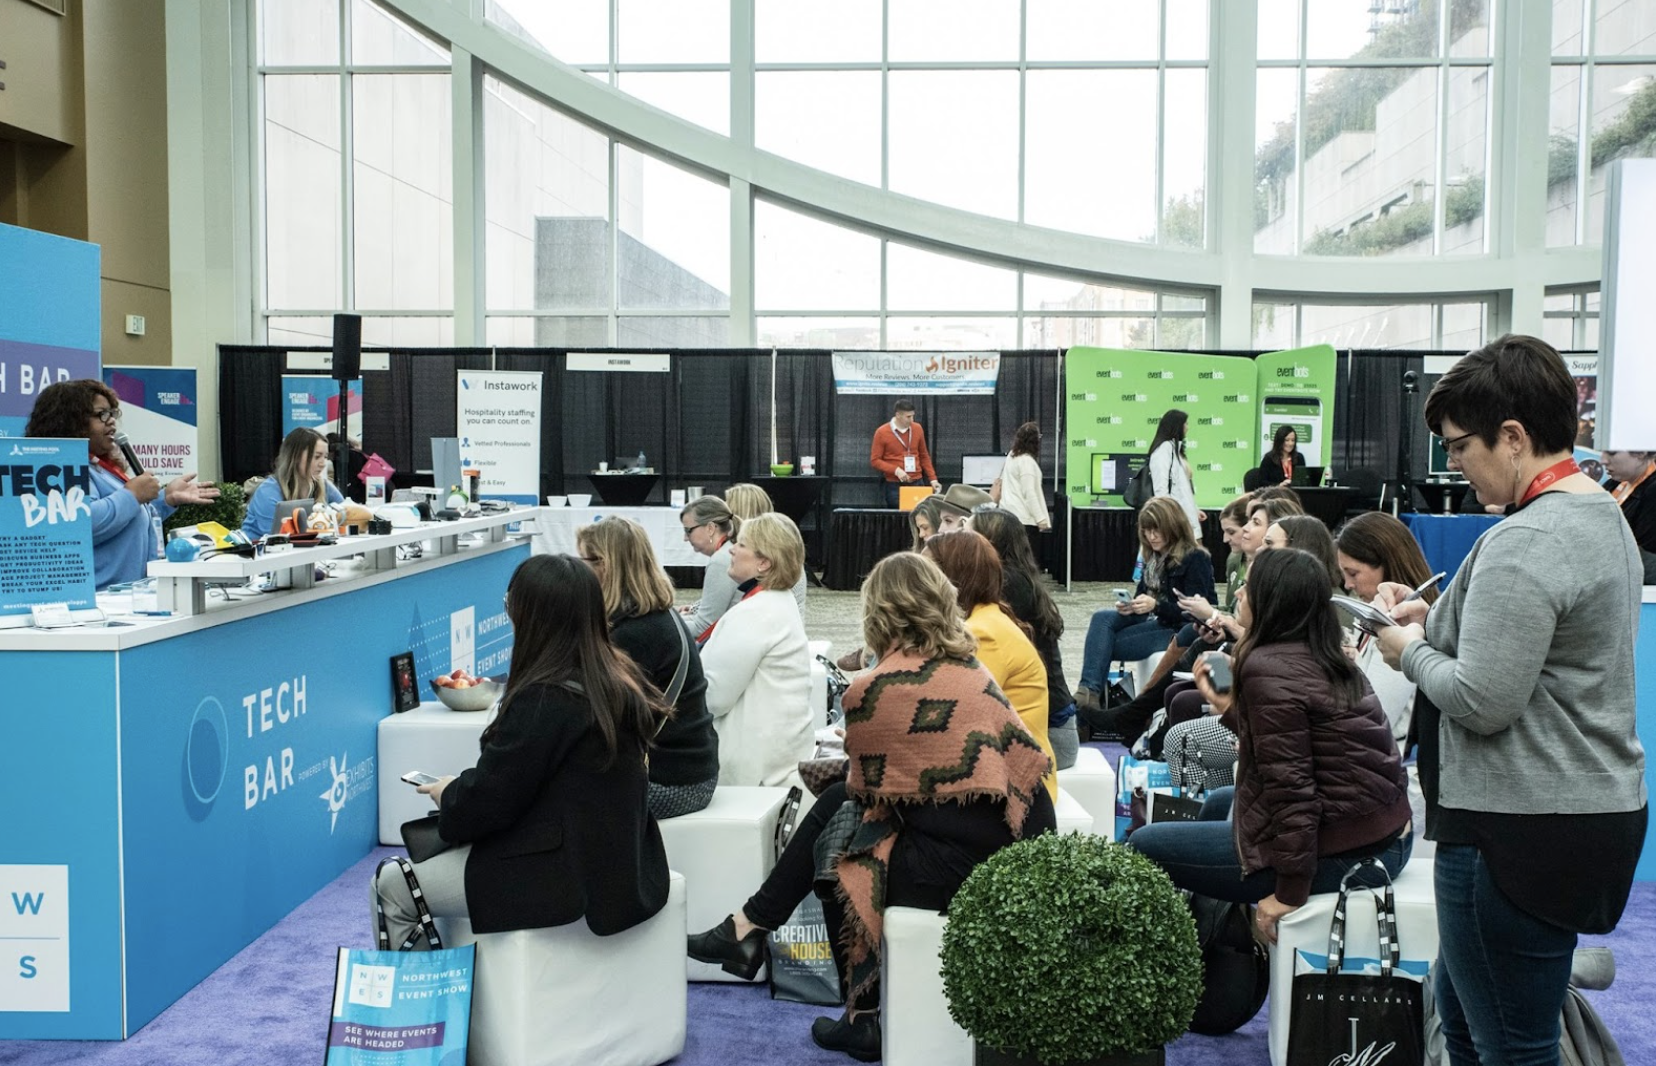 Our Top Tips, Templates, and Tricks to Maximize Your Exhibitor Experience